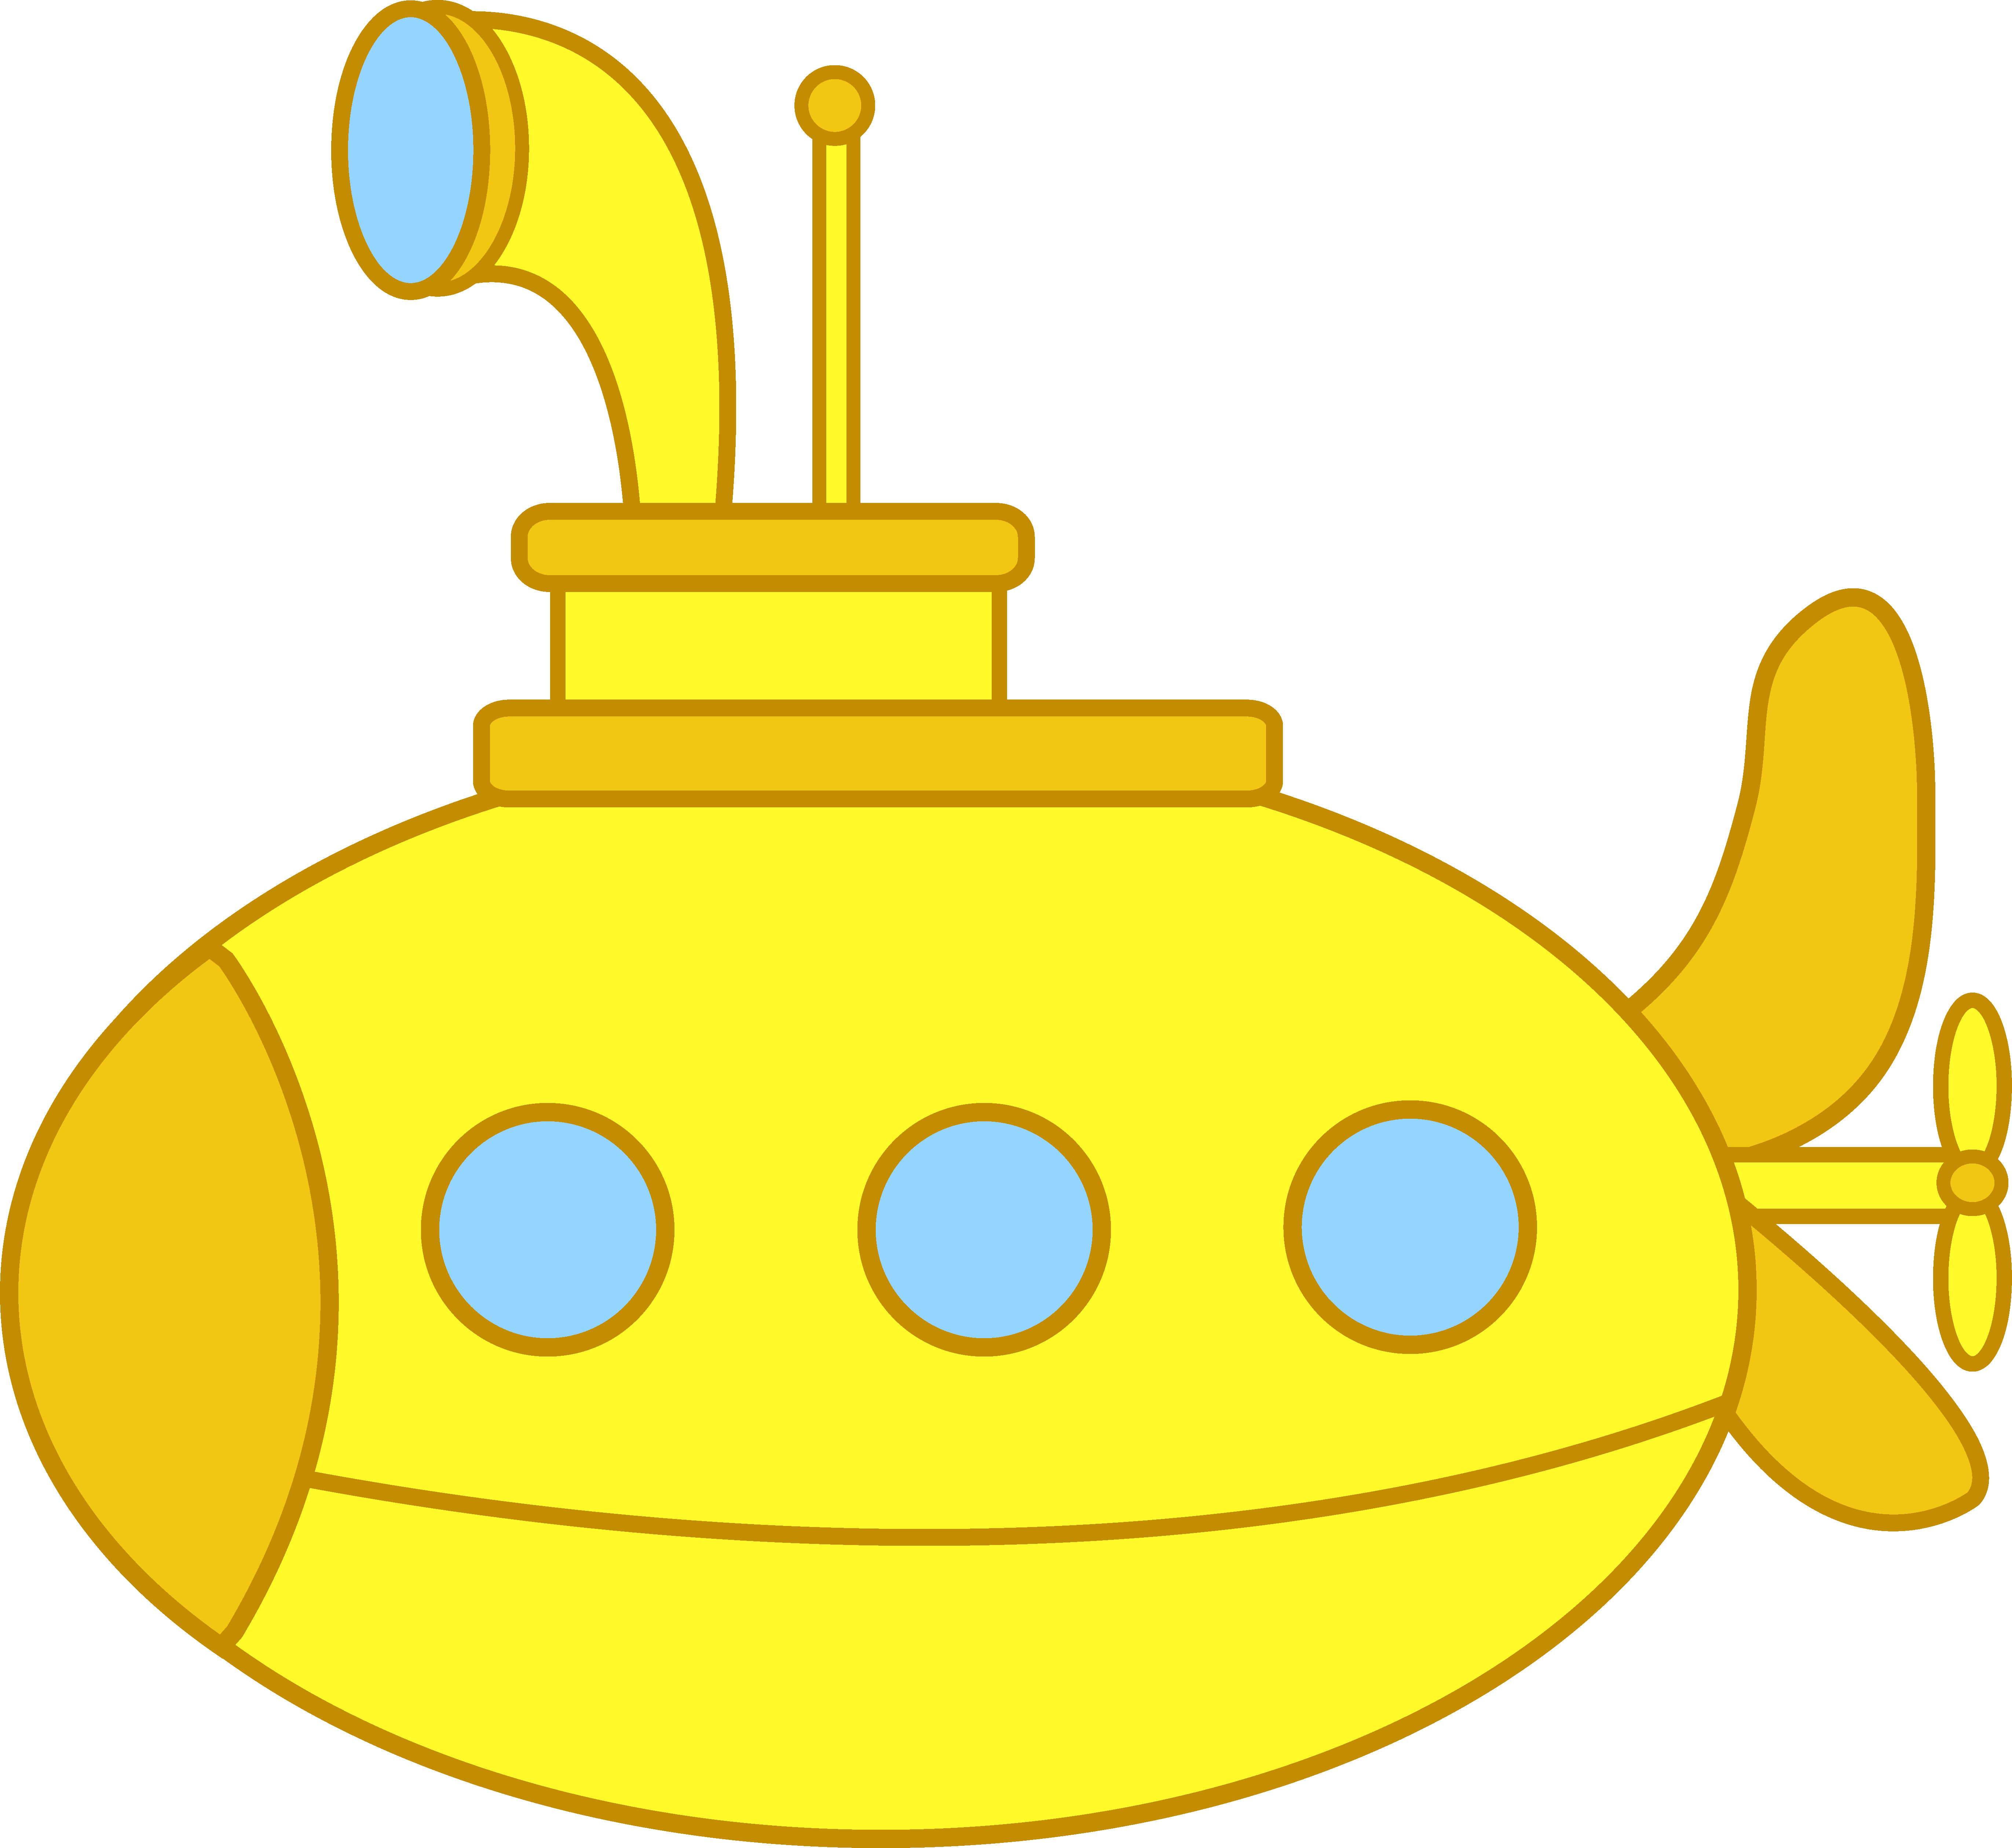 Little yellow submarine free. Water clipart cute